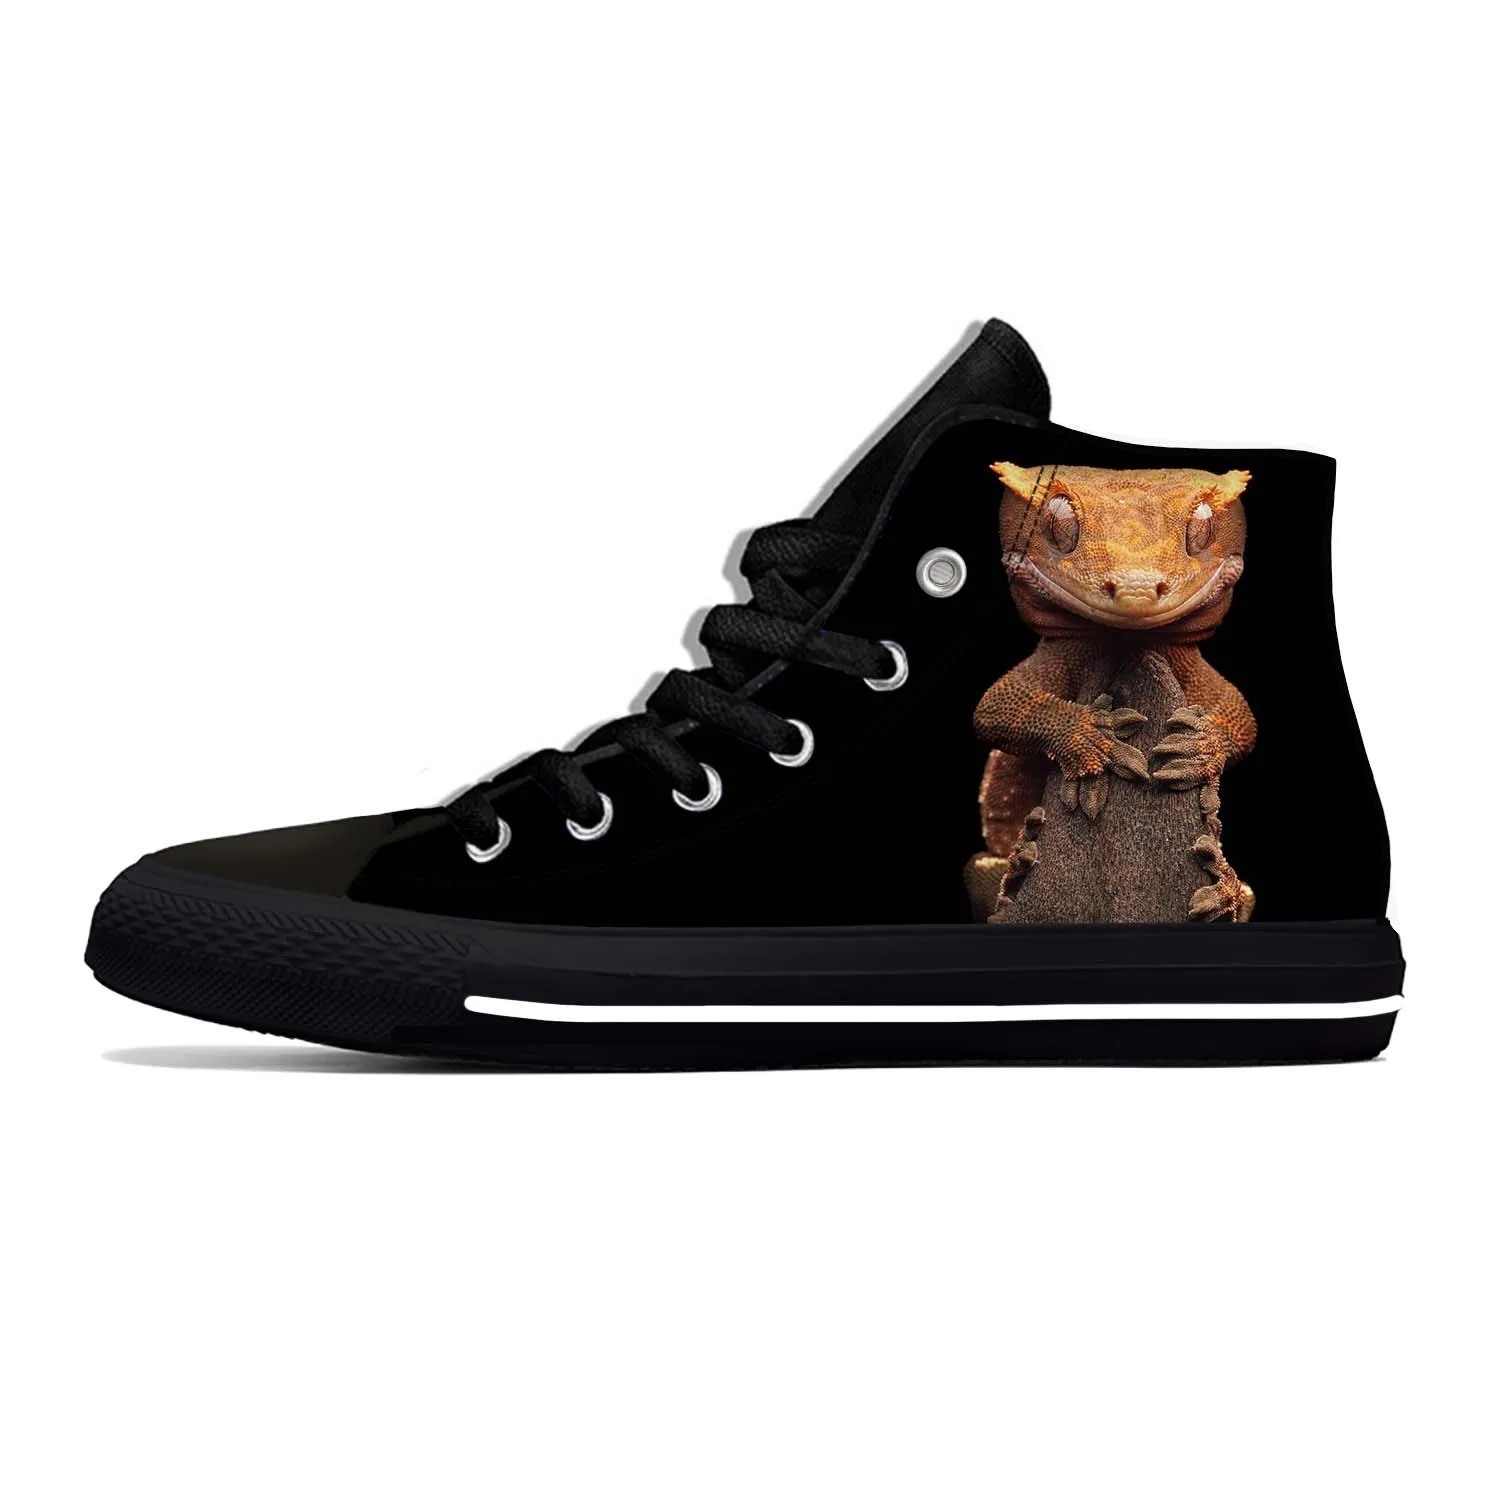 

Crested Leopard Gecko High Top Sneakers Men Women Teenager Fashion Casual Shoes Canvas Running Shoes 3D Print Lightweight shoe